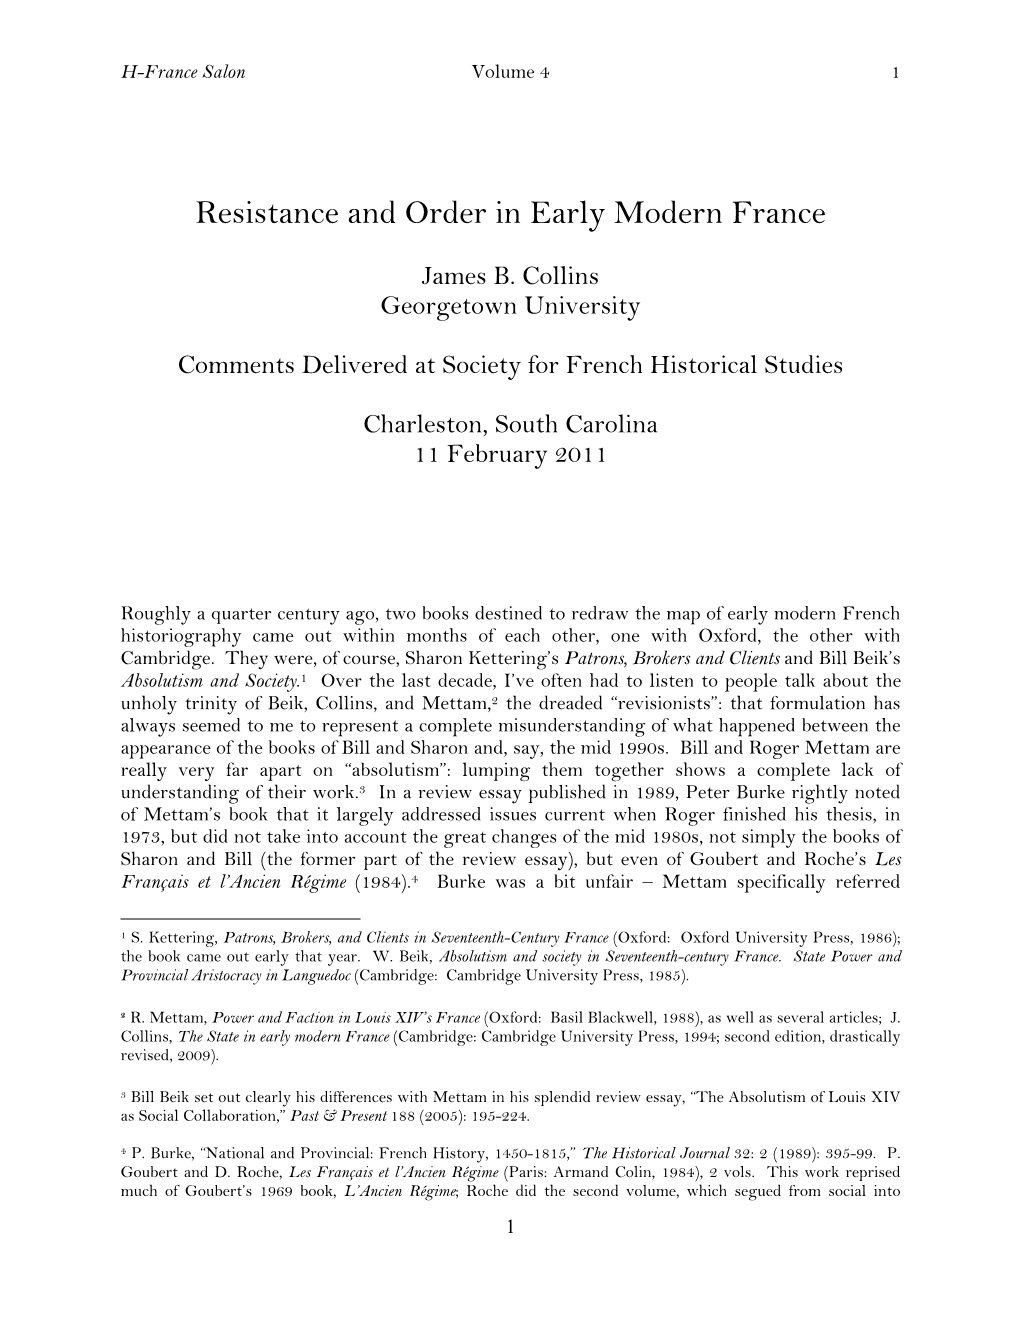 Resistance and Order in Early Modern France